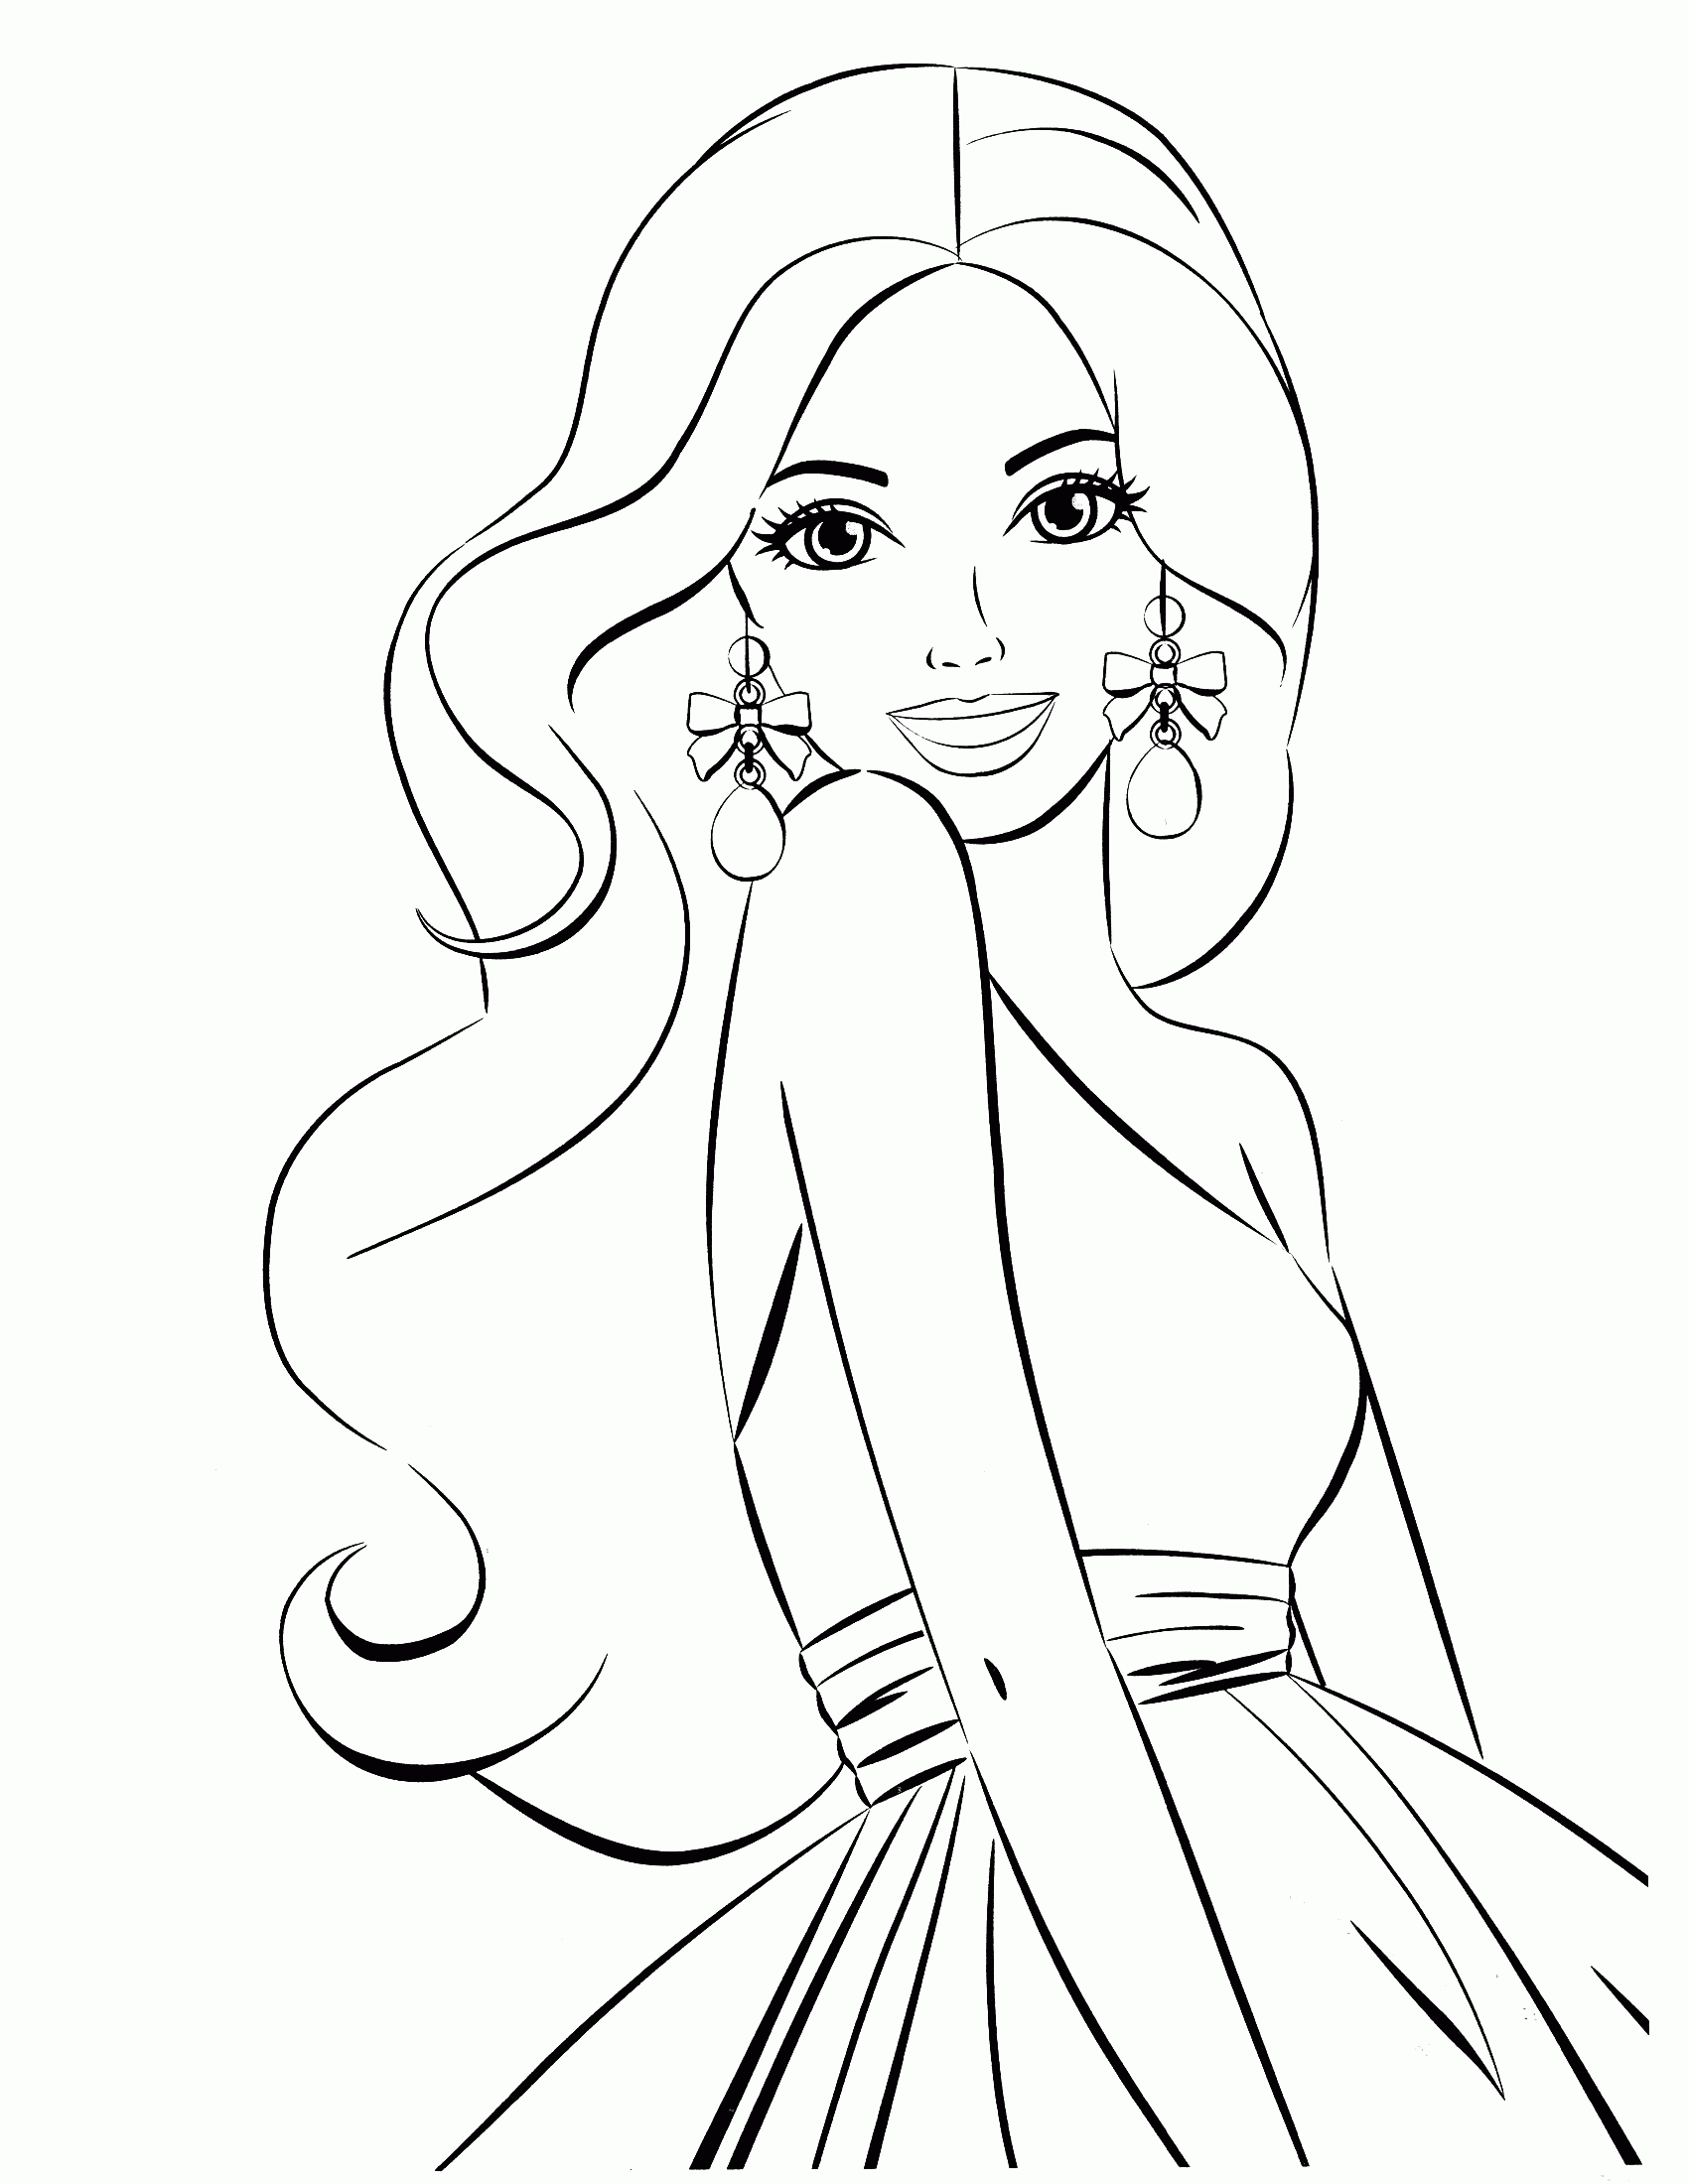 Barbie Fashionista Coloring Pages Coloring Pages For All Ages